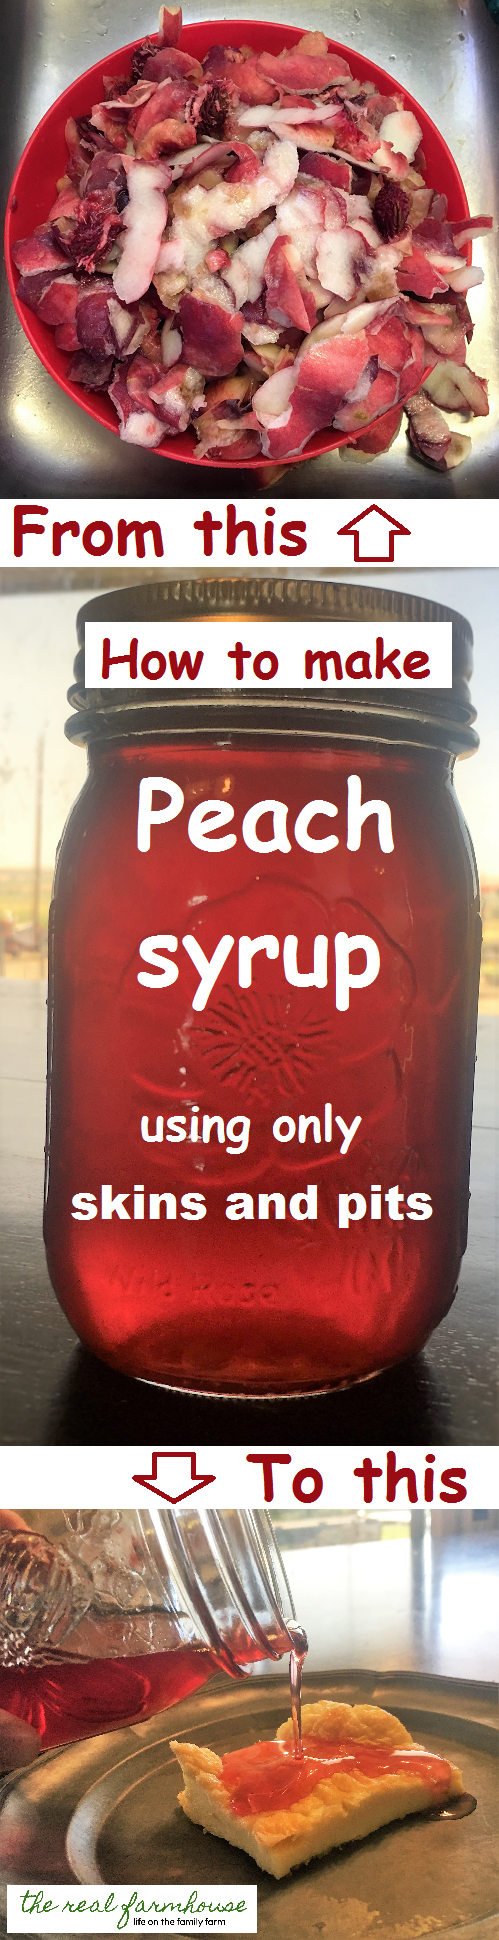 Don't toss out your peach scraps, make delicious peach syrup with them.